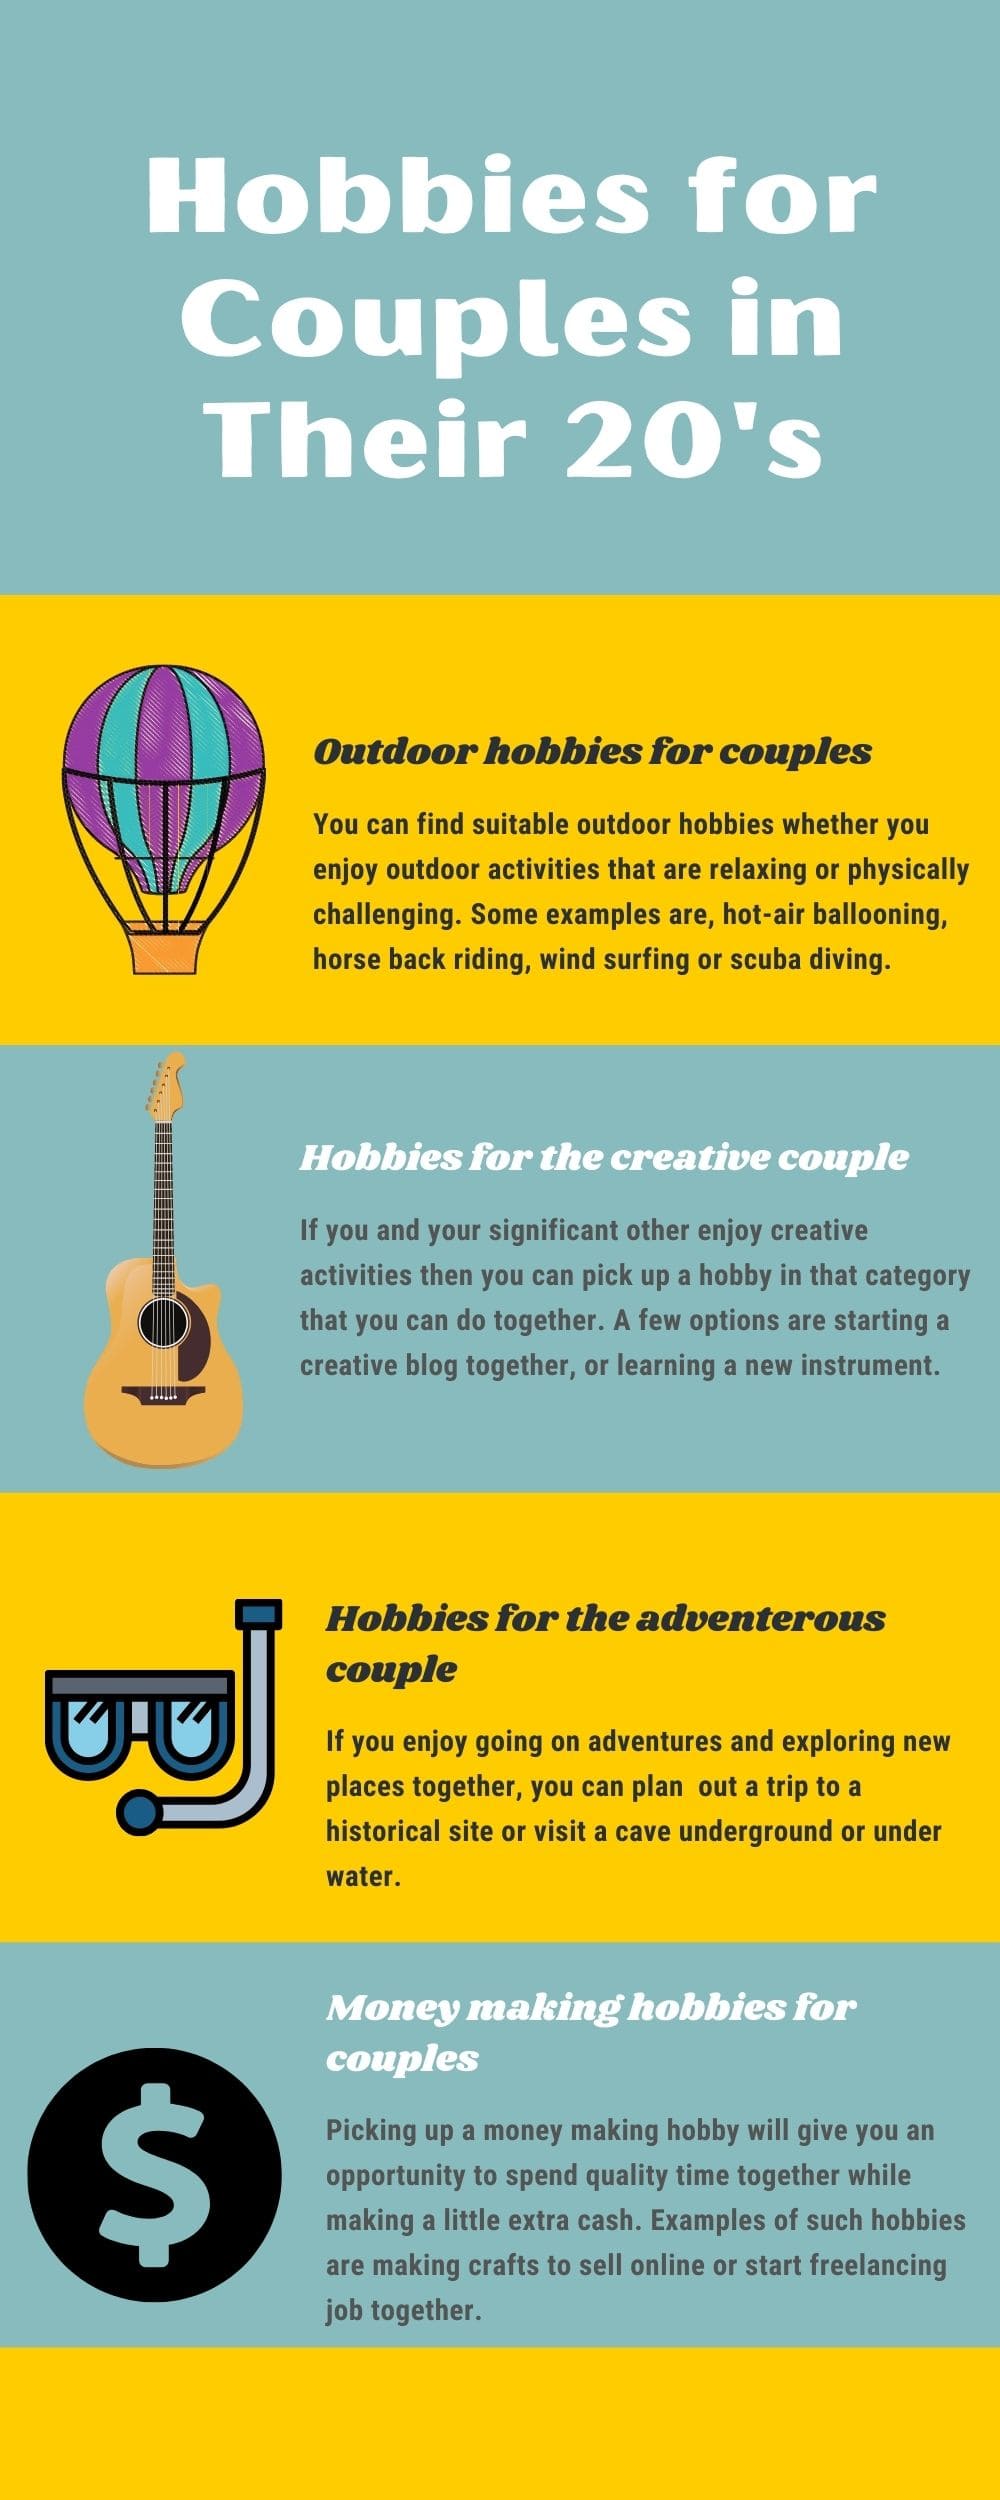 Hobbies for Couples in Their 20's